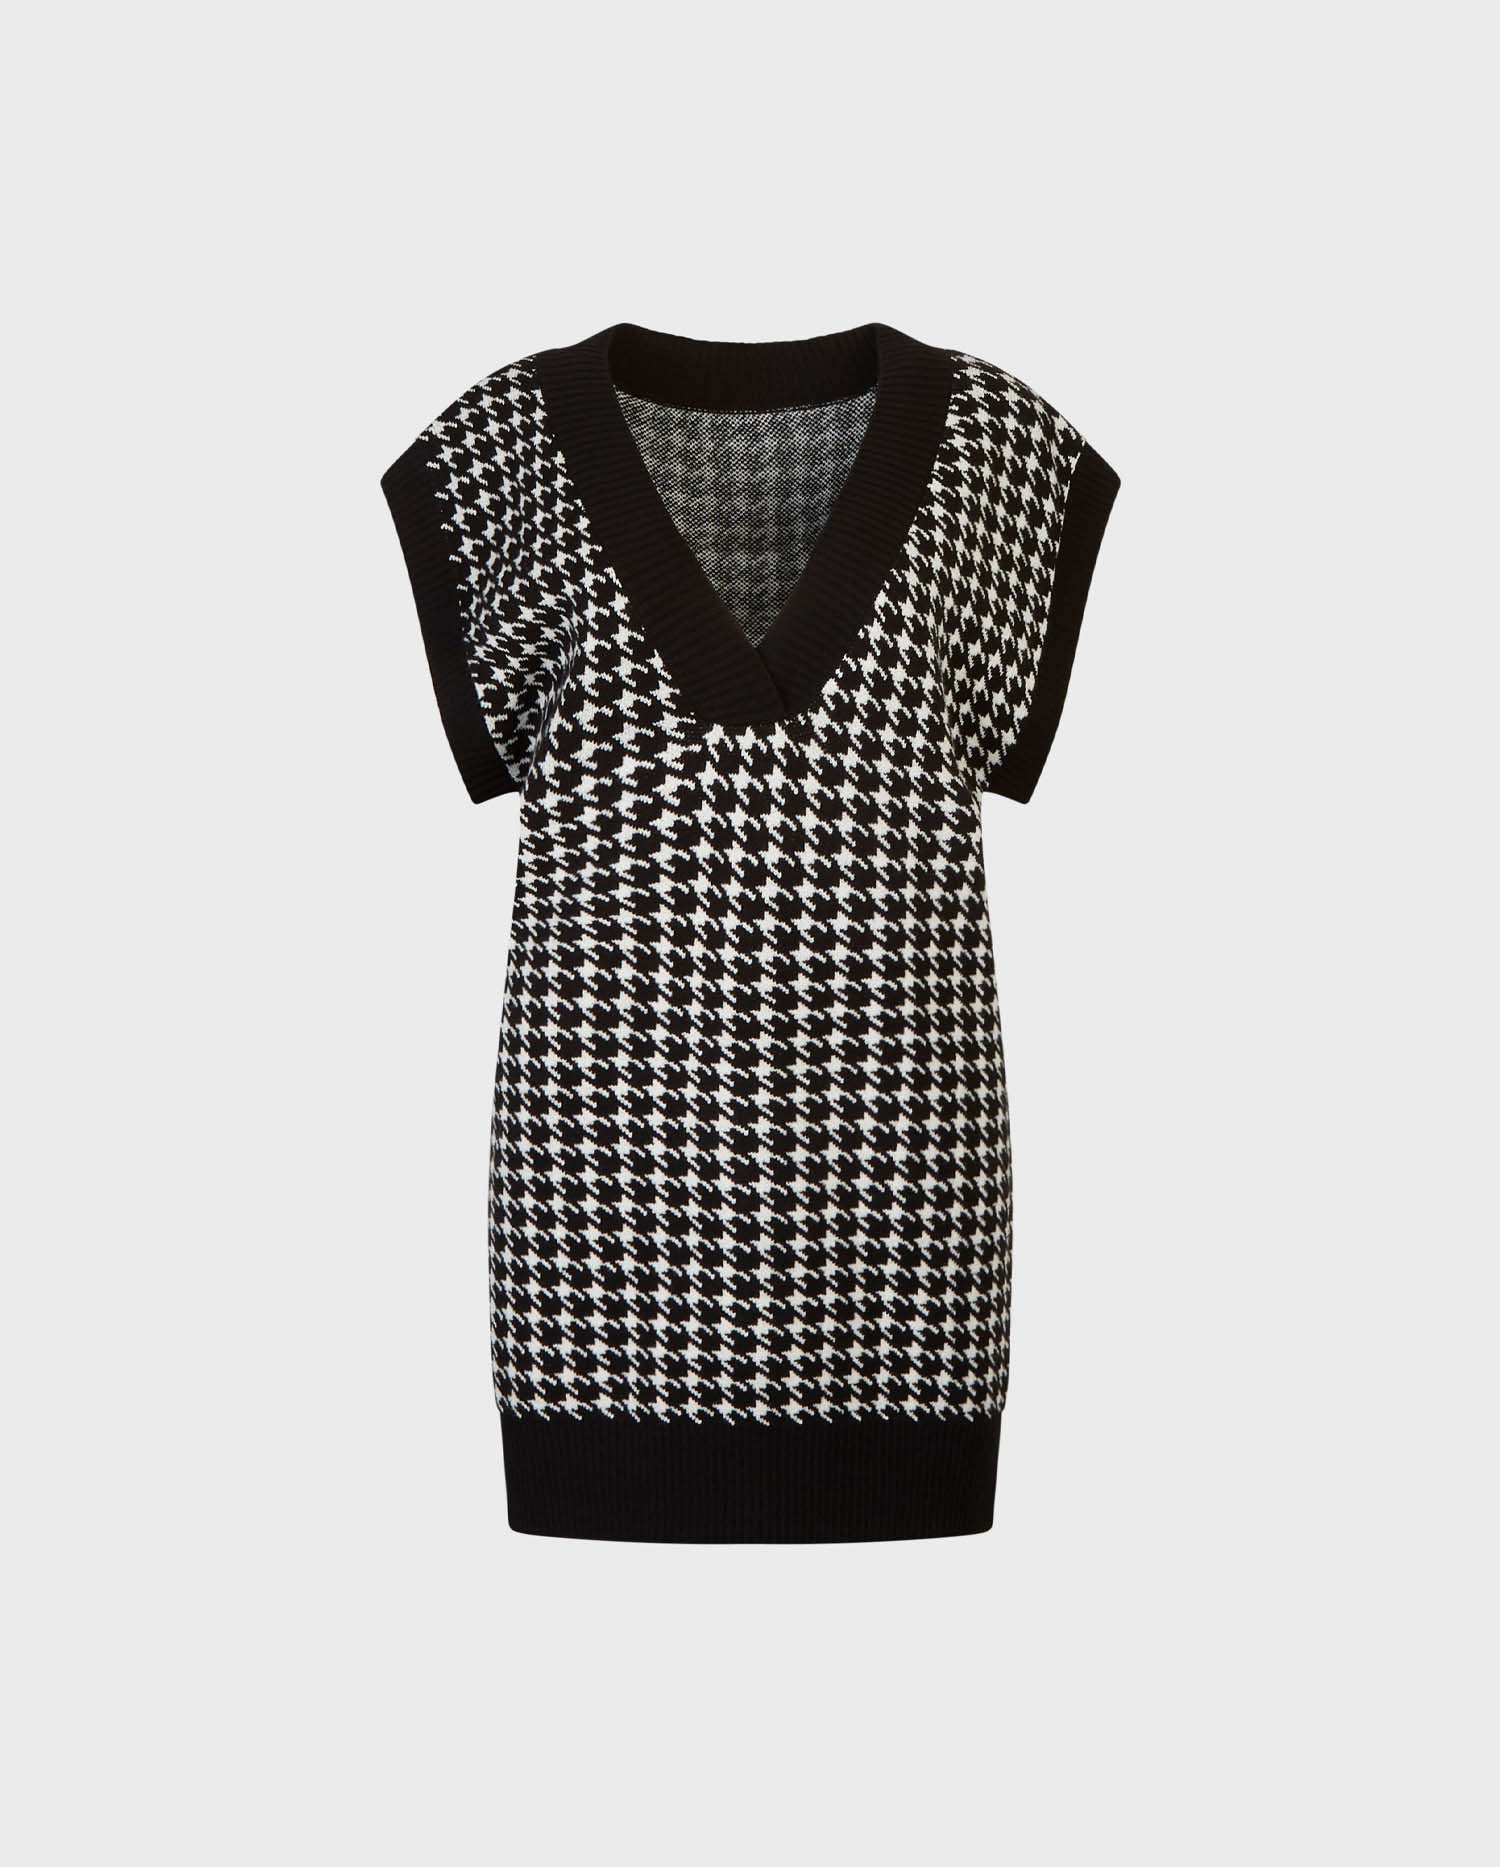 Discover the STENDHAL Knit v-neck tunic sweater in houndstooth print from ANNE FONTAINE